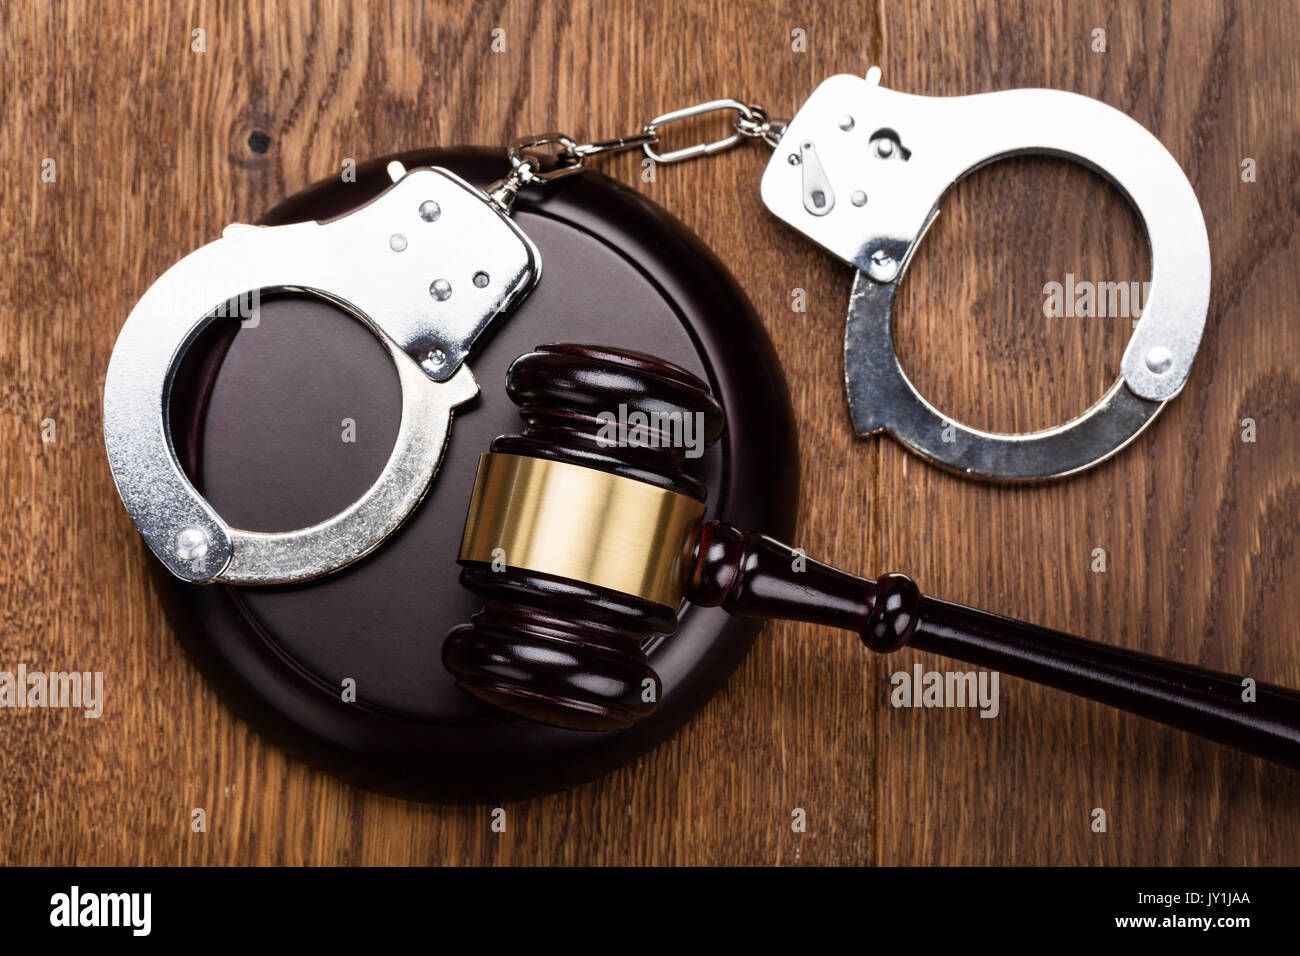 High Angle View Of Judge Gavel And Handcuffs On Wooden Desk Stock Photo